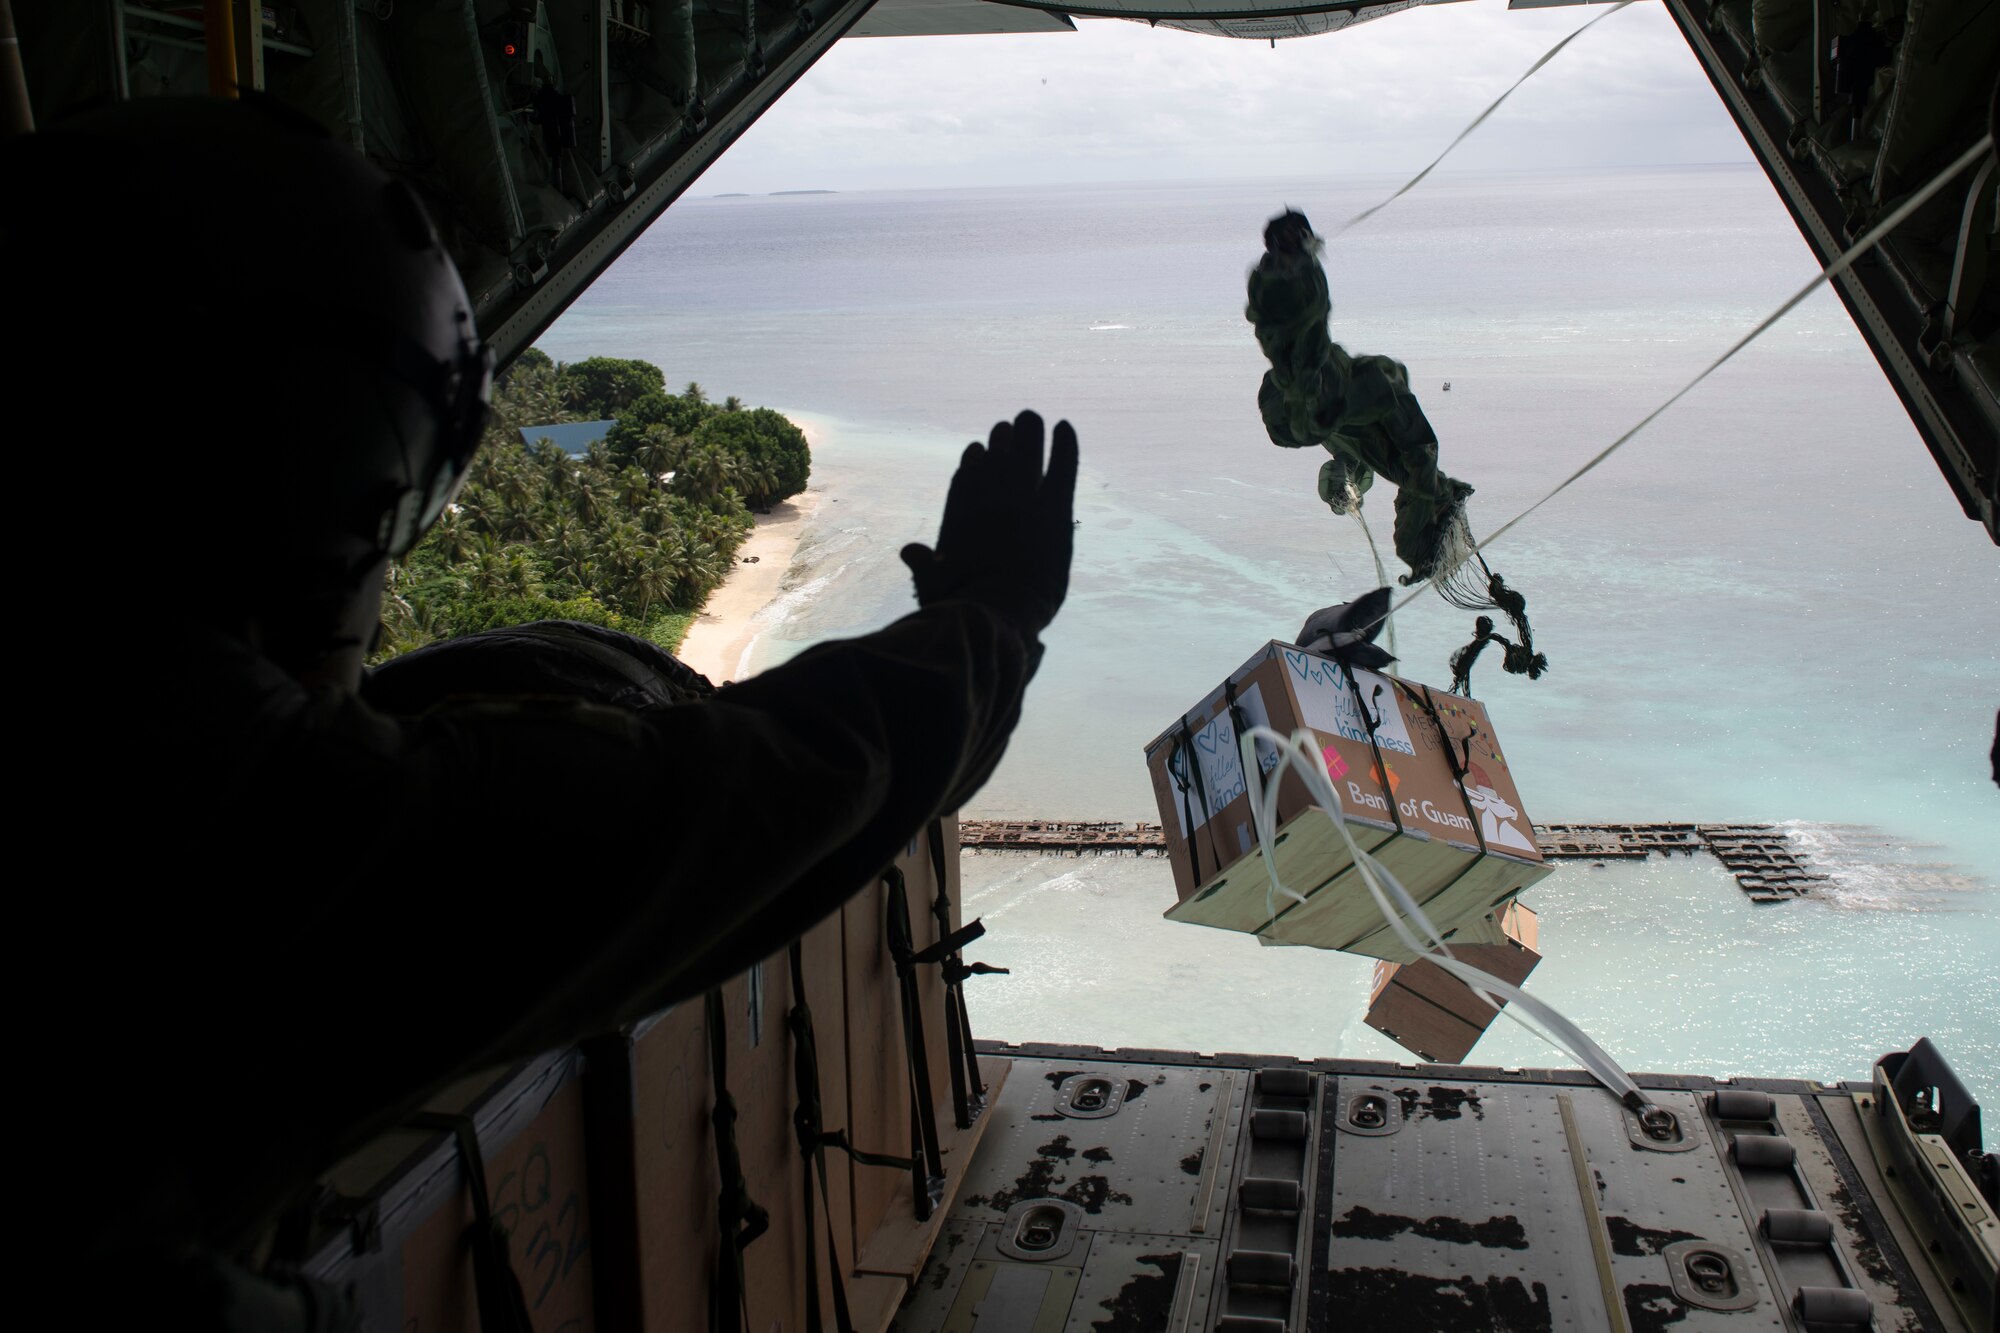 Col. Andrew Campbell, 374th Airlift Wing commander, waves after pushing out bundles during the 70th Anniversary of Operation Christmas Drop near Asor, Dec. 5, 2021. OCD is the Department of Defense’s longest-running humanitarian aid and disaster relief training mission and provides relief to more than 55 islands throughout the Pacific. Operations such as OCD provide the U.S. and its partners the opportunity to enhance joint operational capabilities and maintain preparedness for real-world emergencies. (U.S. Air Force photo by Tech. Sgt. Joshua Edwards)